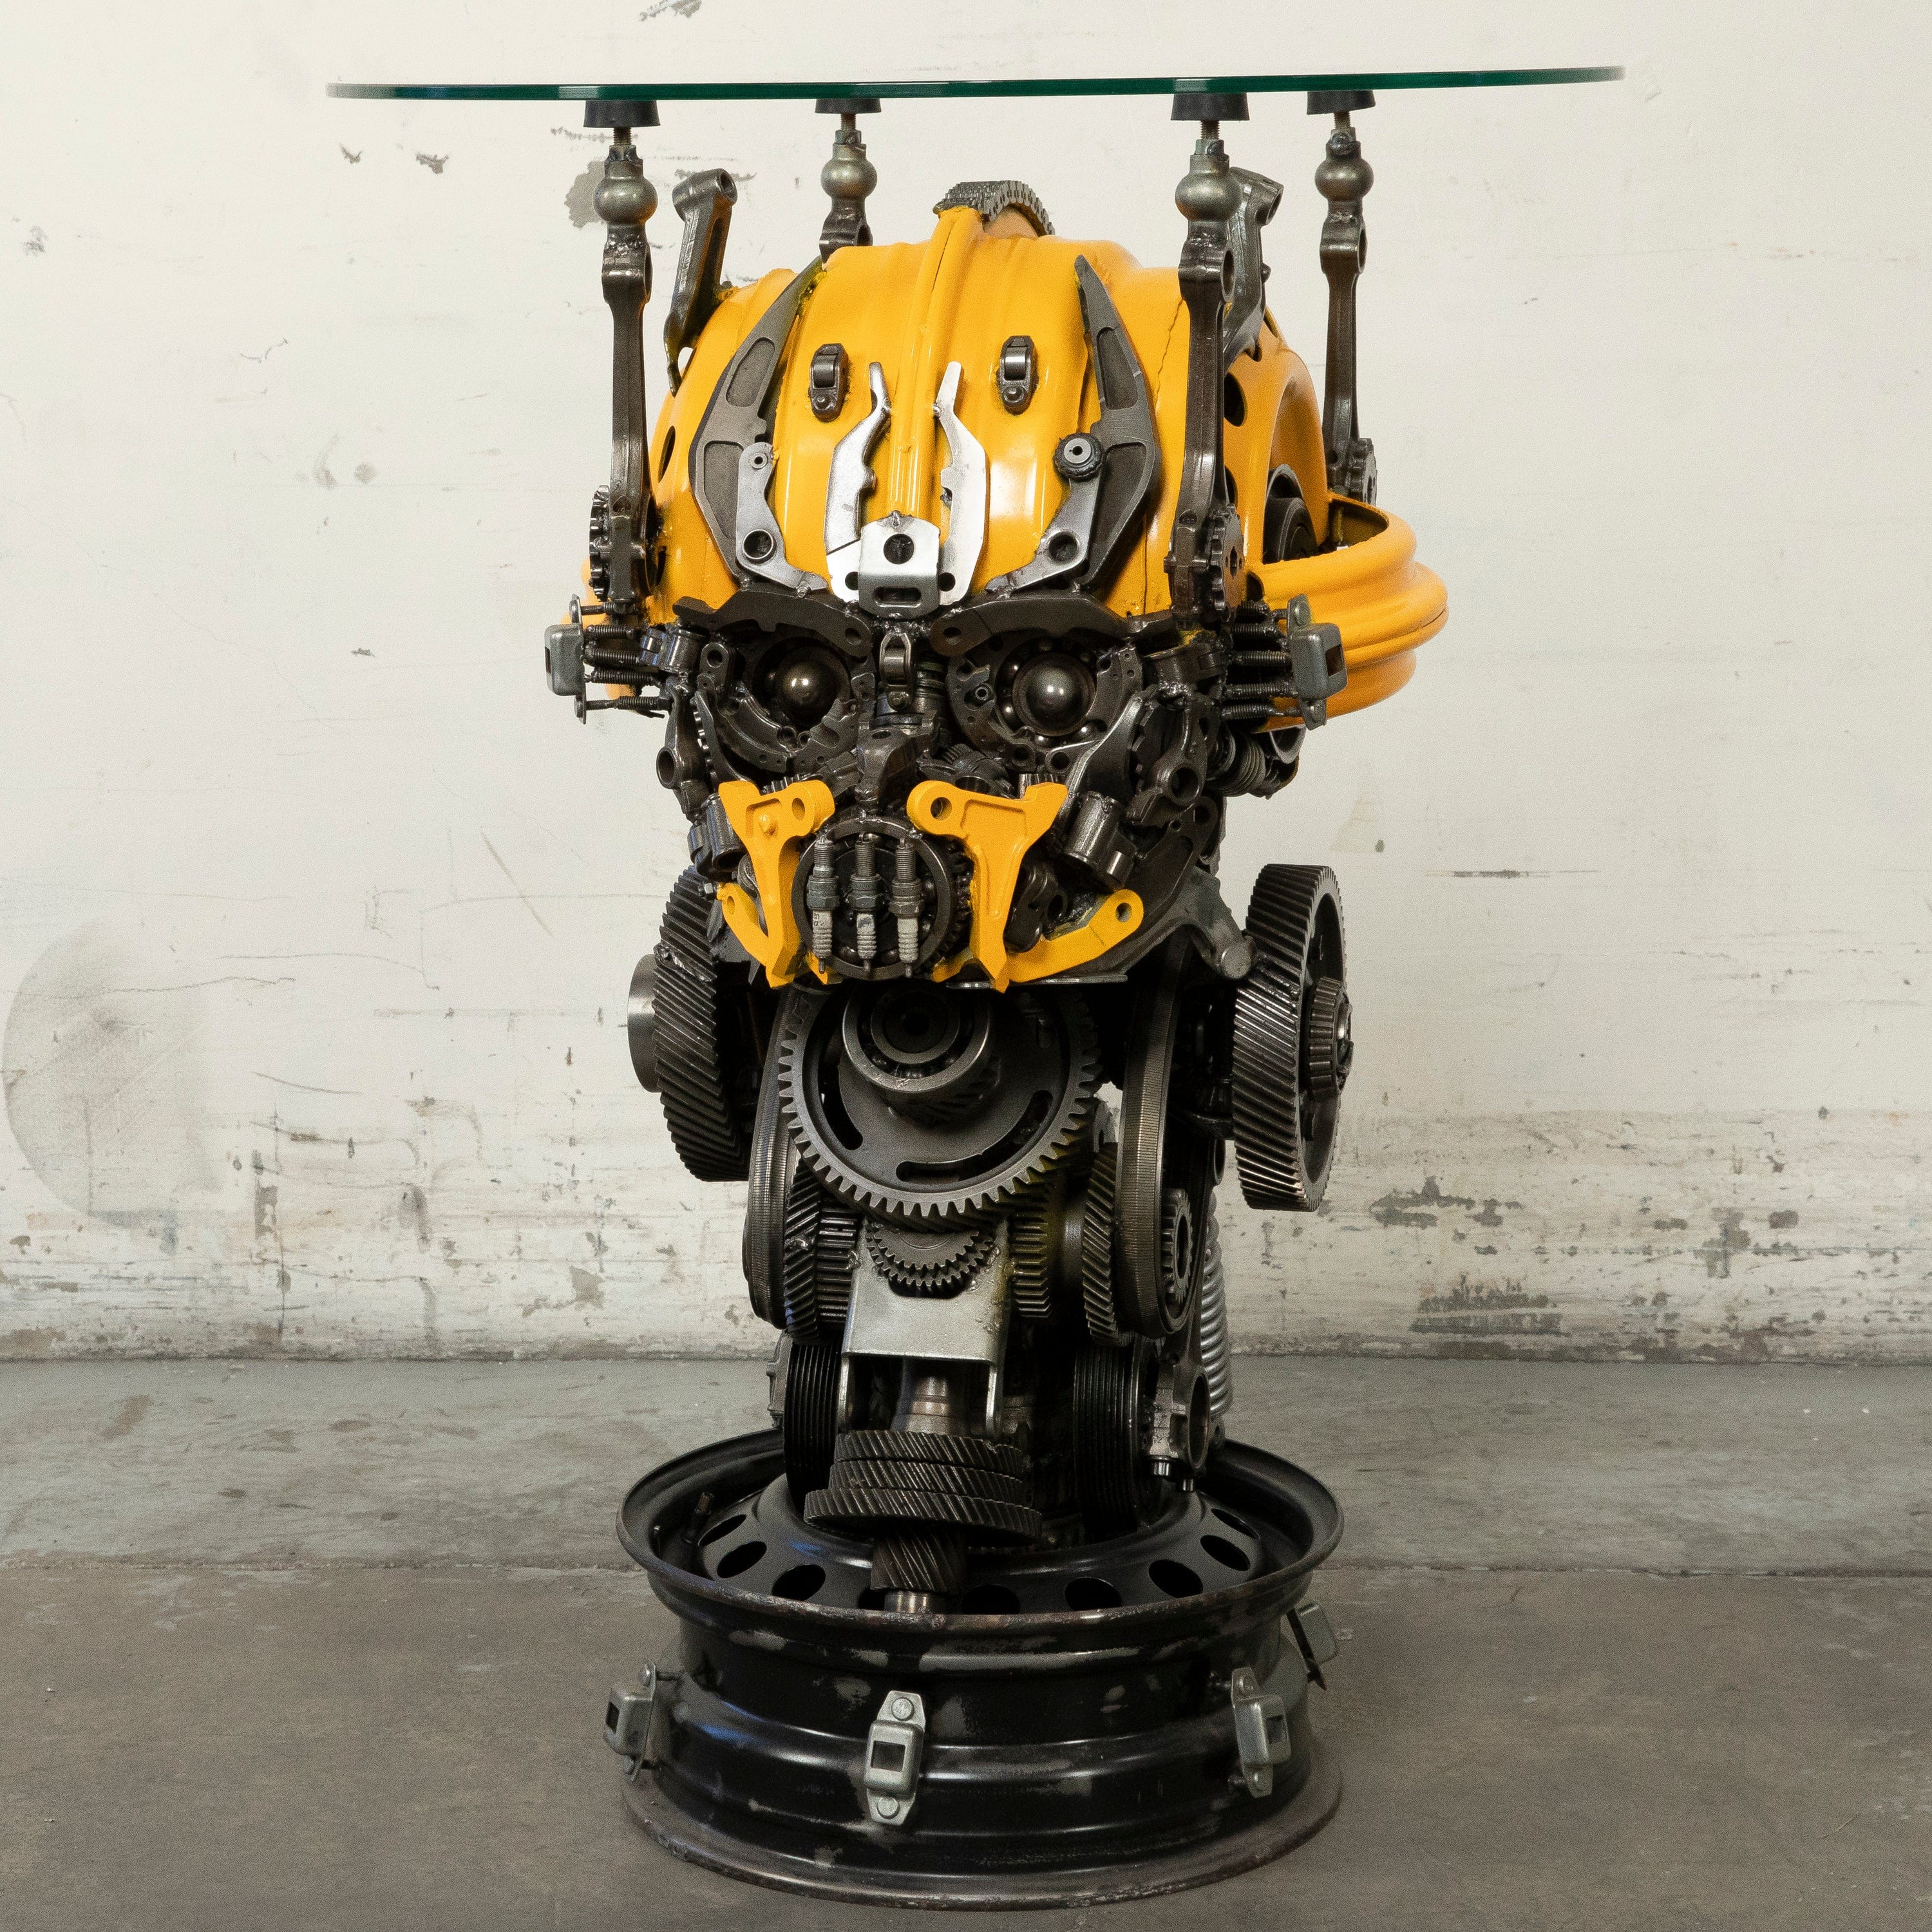 Kalifano Recycled Metal Art 36" Bumblebee Inspired Recycled Metal Sculpture Table RMS-BBTAB90-S04